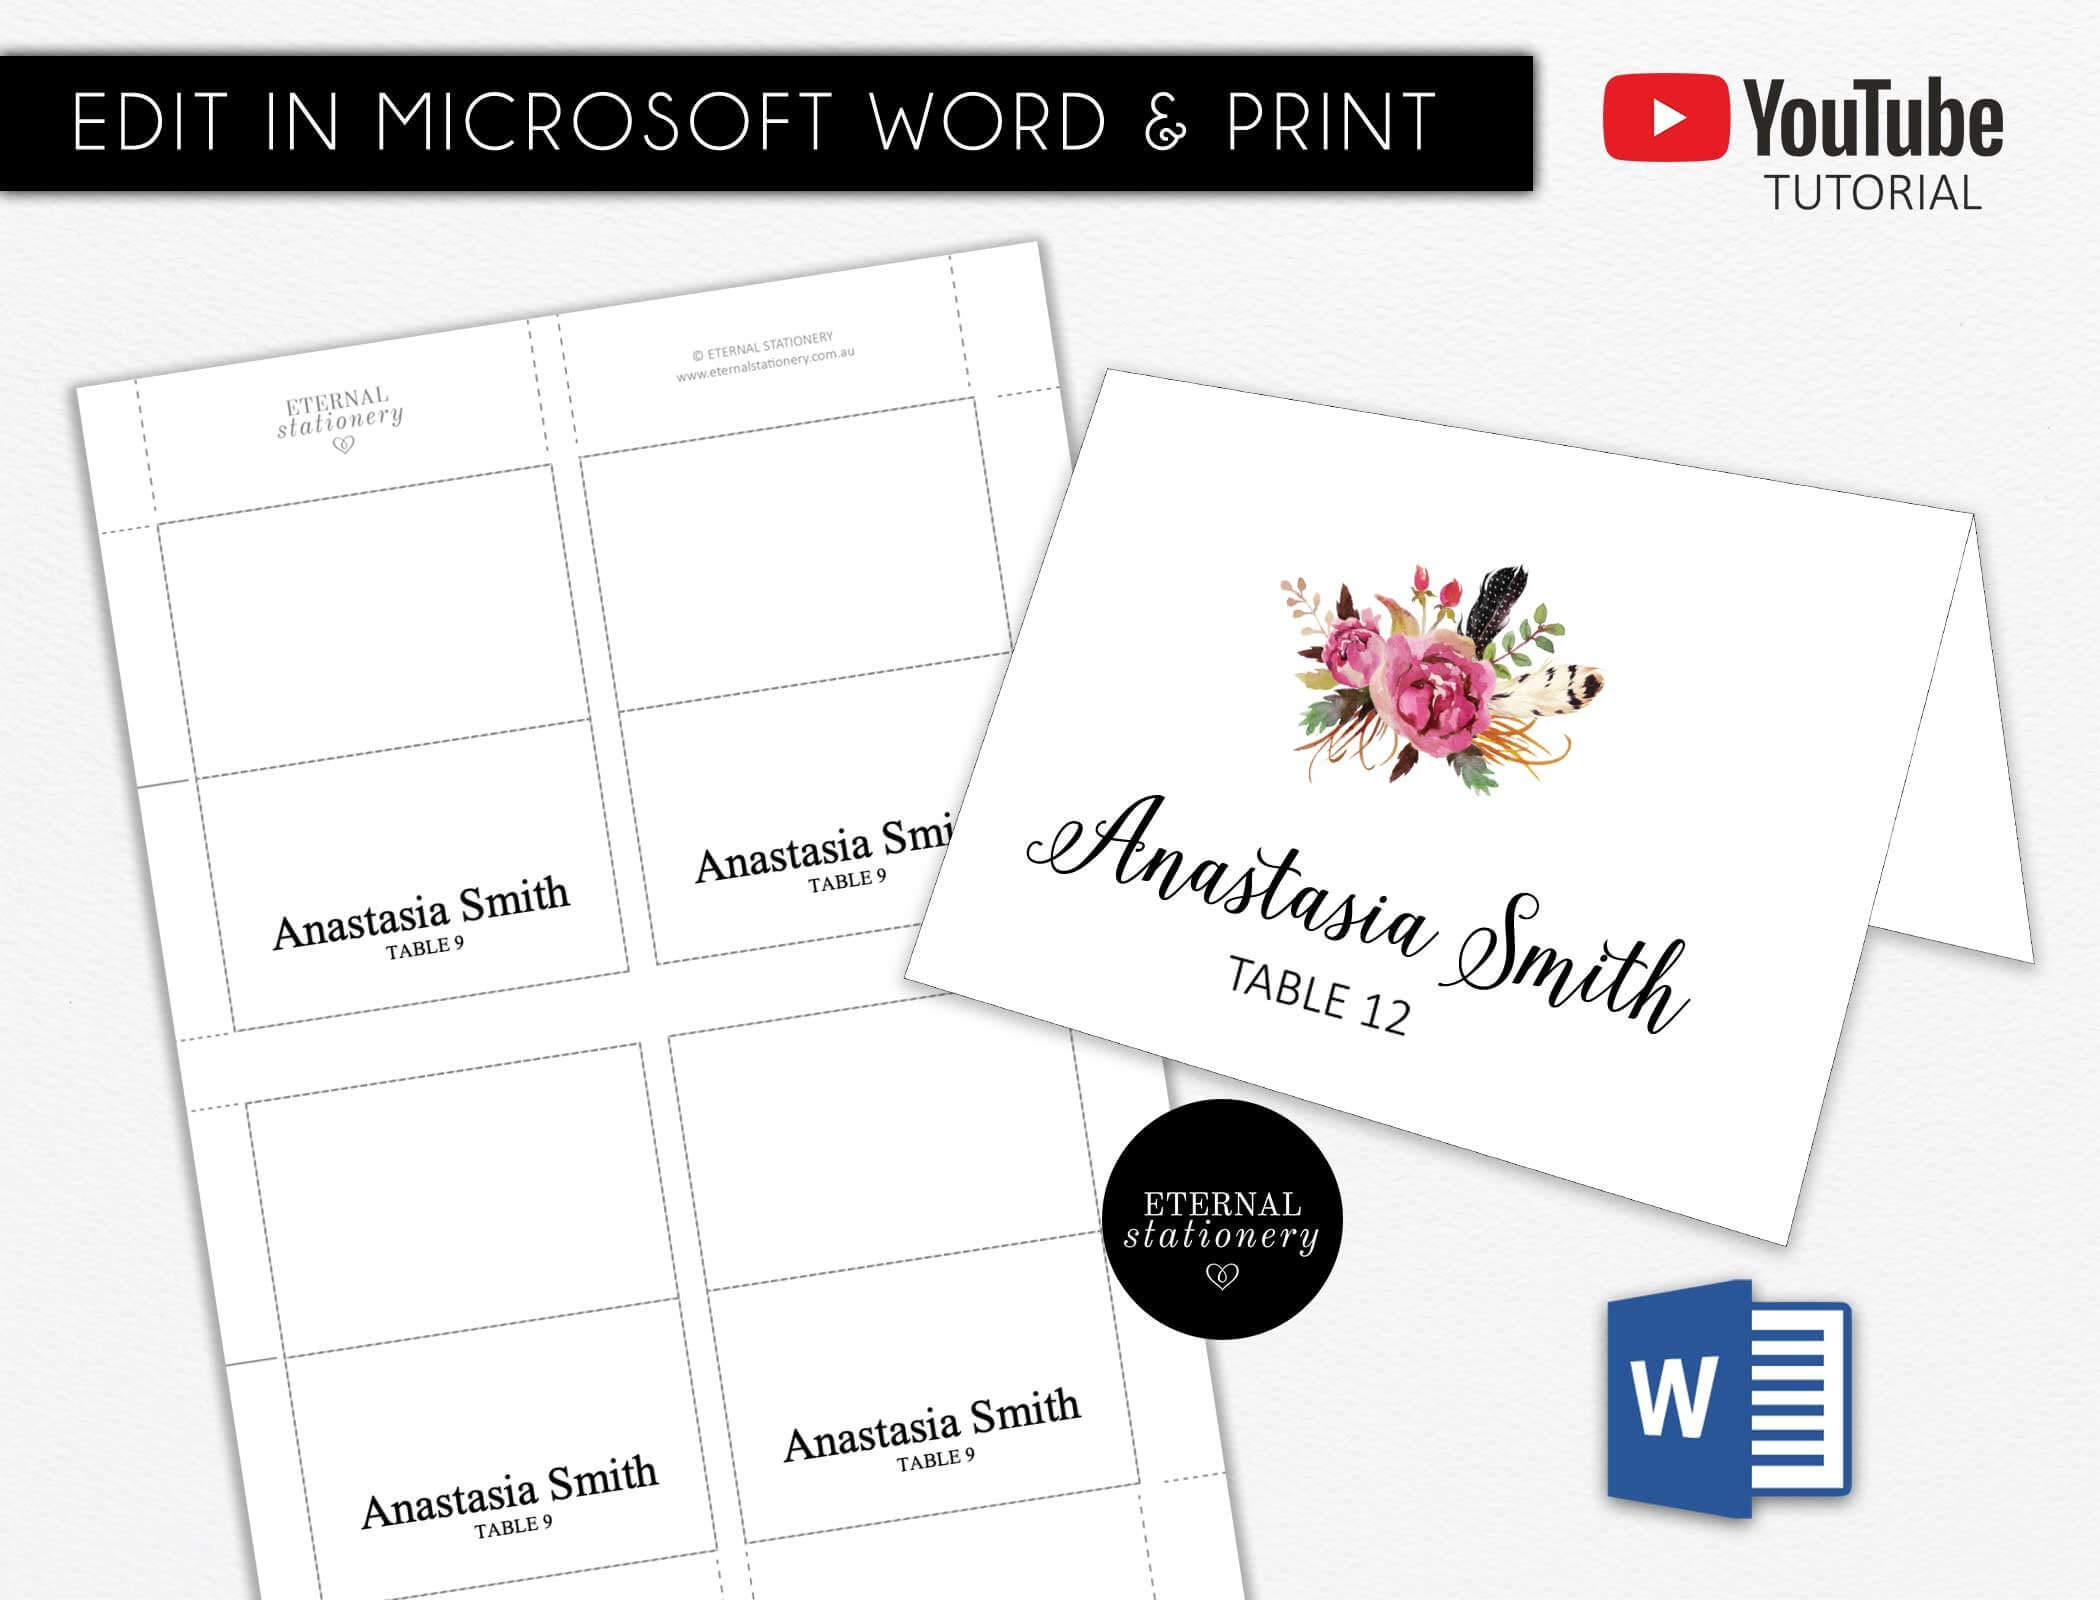 Diy Editable Microsoft Word Place Card Template, Wedding Place Card, Tent  Card, Engagement, Corporate Place Card, Escort Card, Pc 01 Pertaining To Ms Word Place Card Template